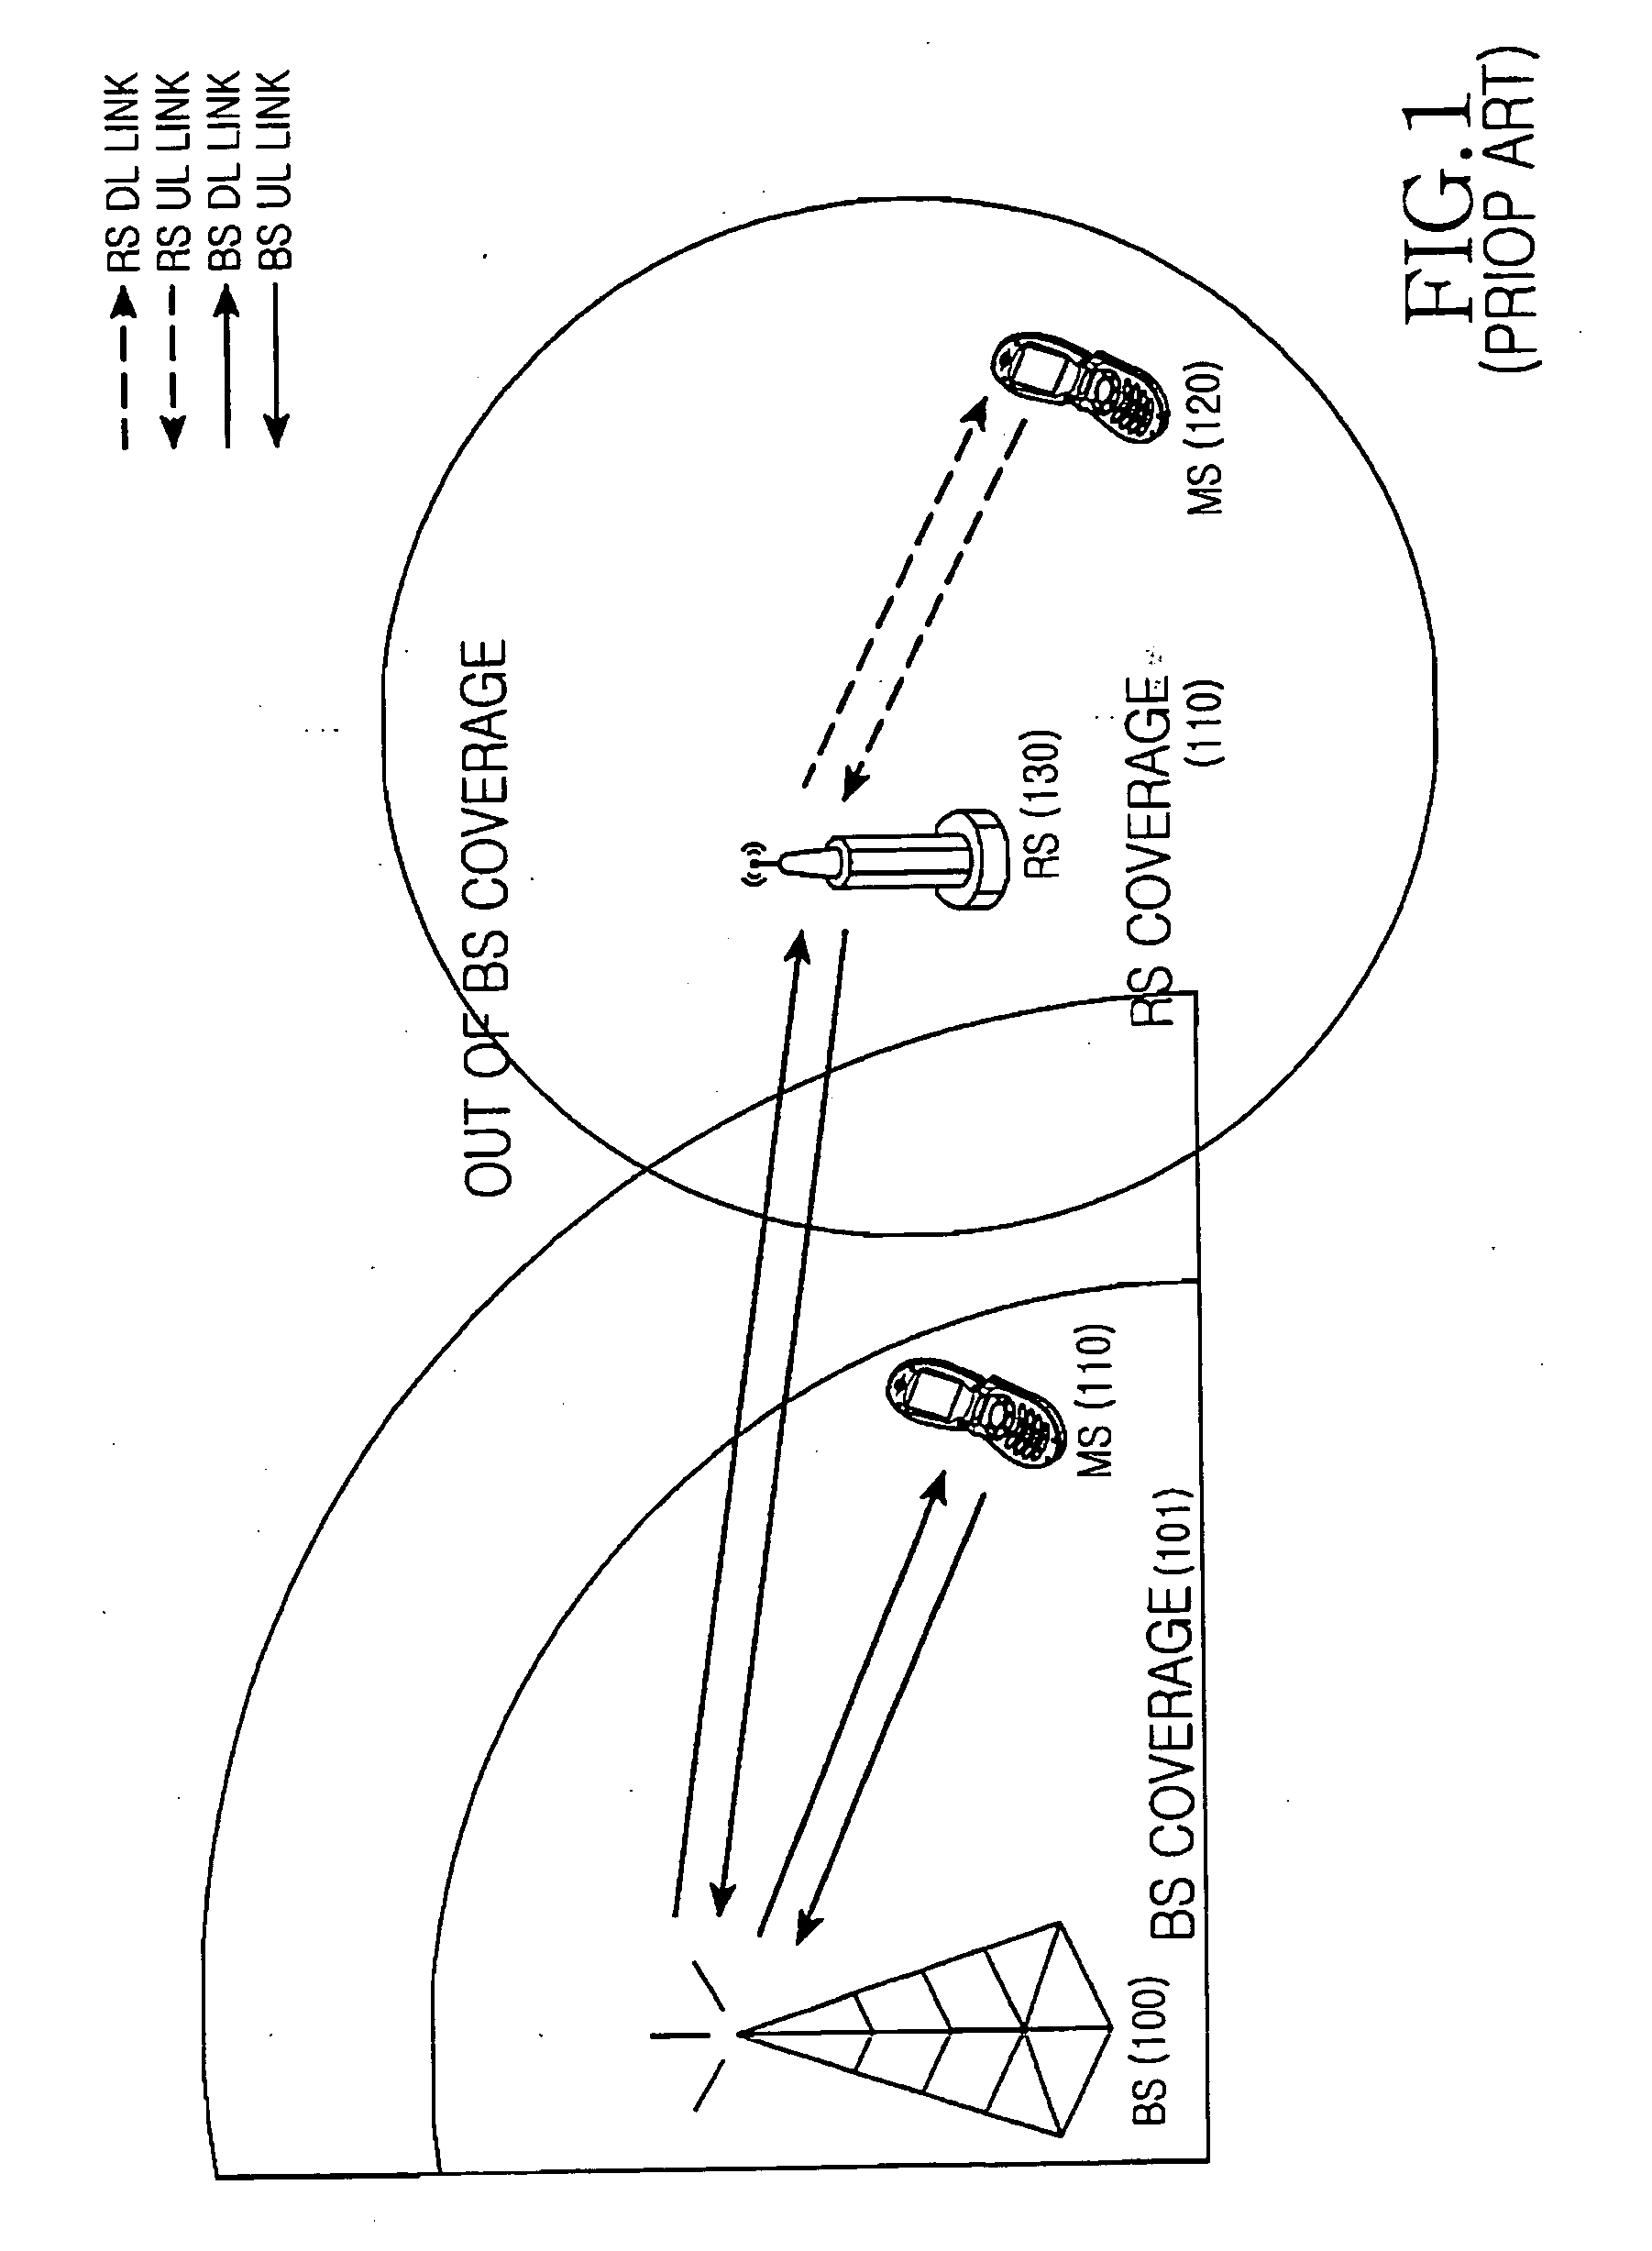 Apparatus and method for constructing a frame to support multilink in multi-hop relay cellular network